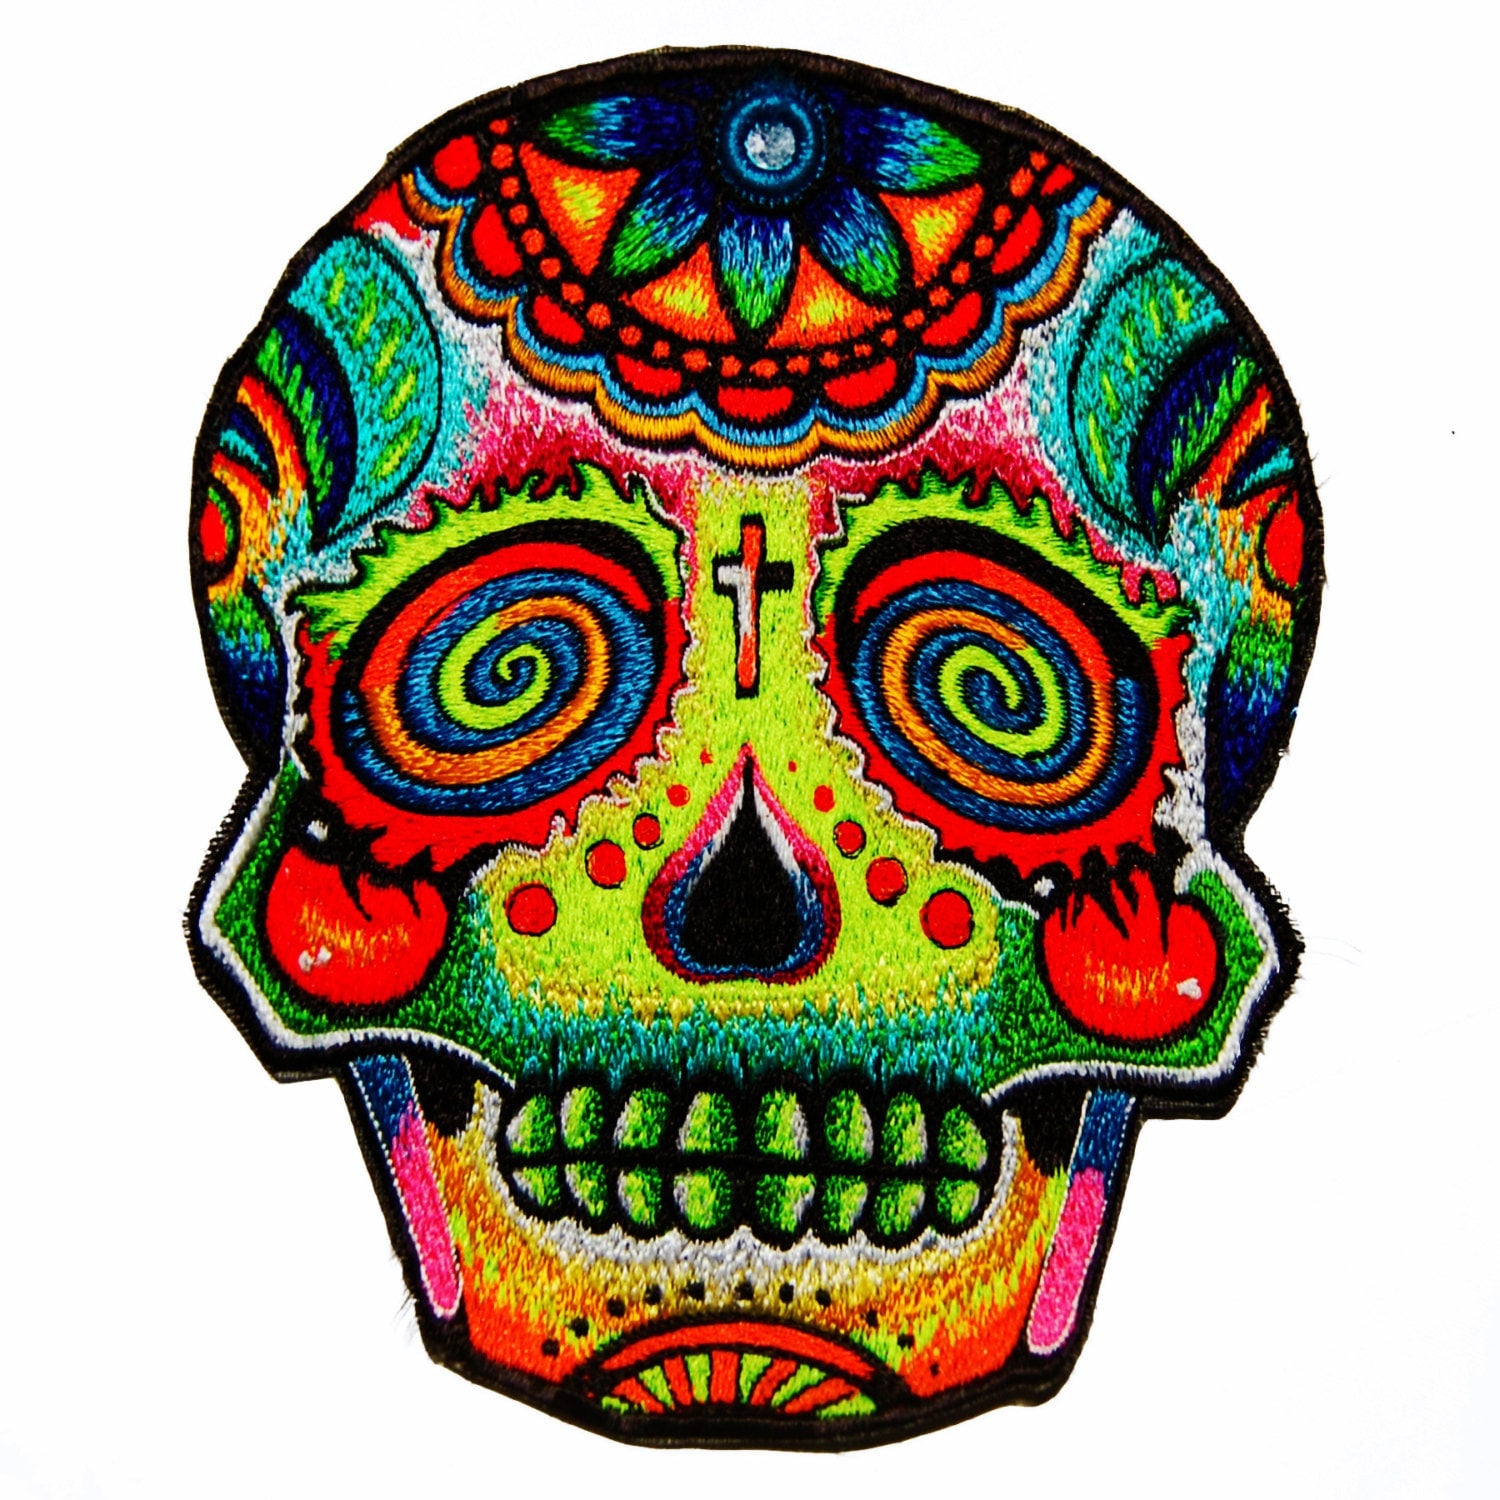 Mirror Skull Patch psychedelic dead blacklight glowing psy embroidery psytrance goatrance grateful deadhead consciousness expansion